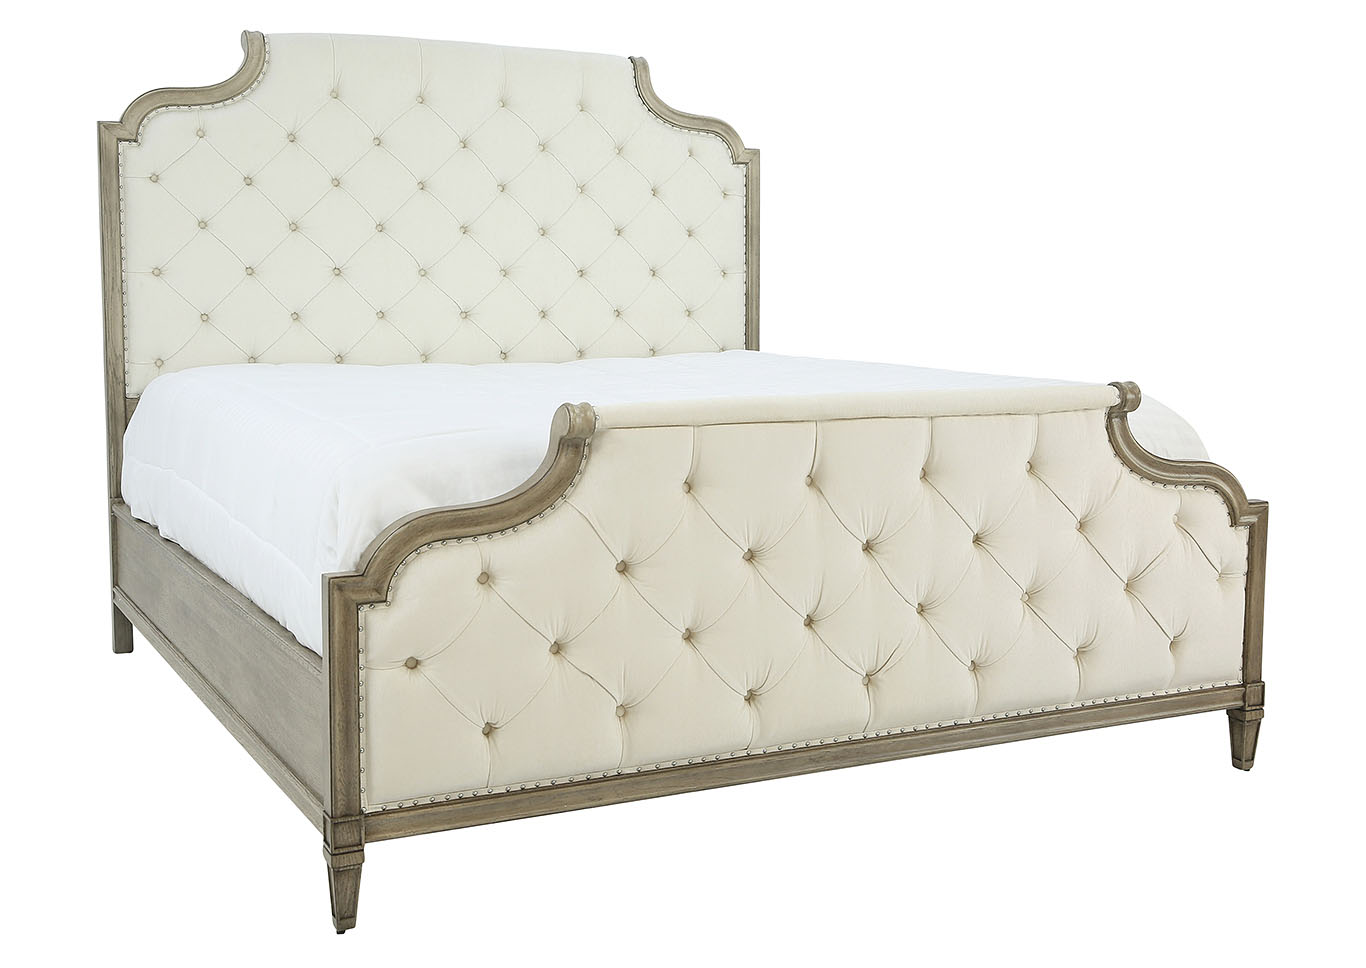 MARQUESA GRAY KING UPHOLSTERED BED